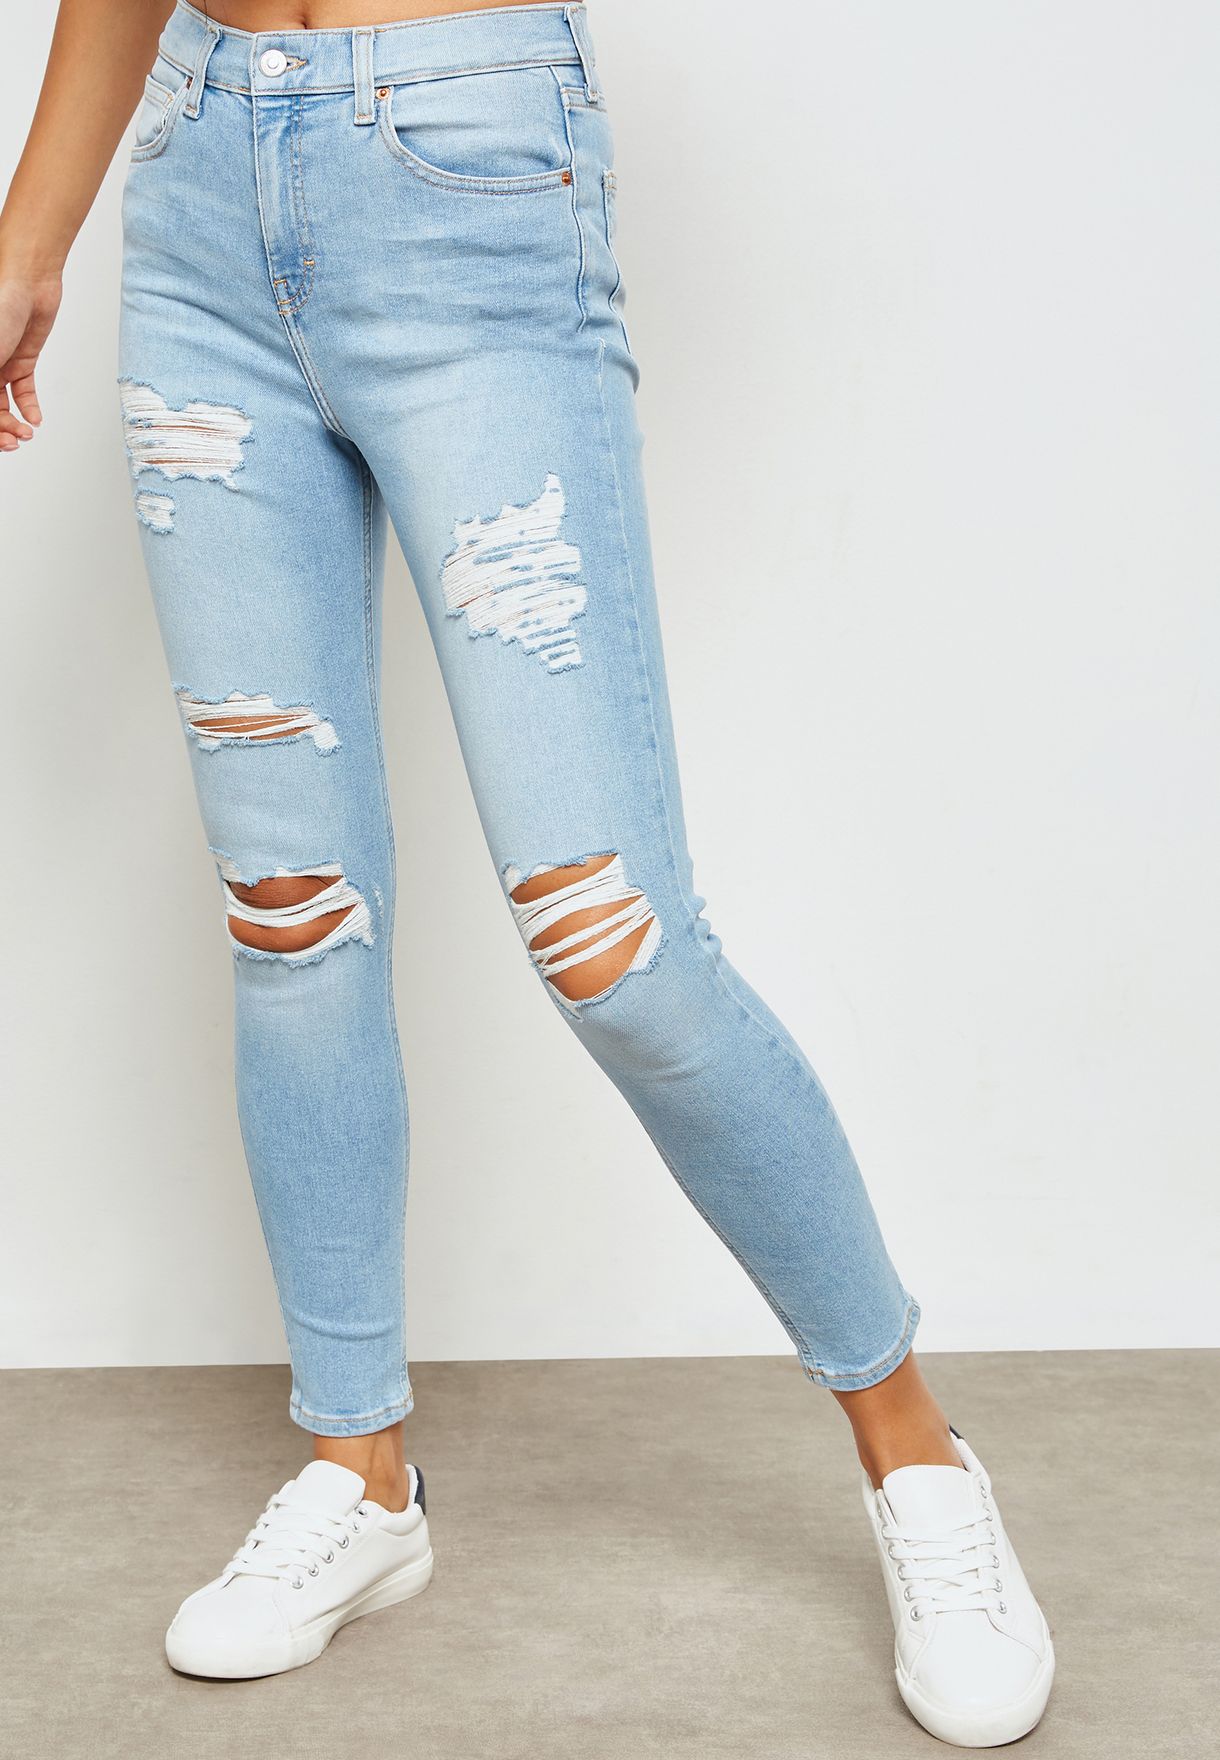 topshop mid blue ripped jamie jeans